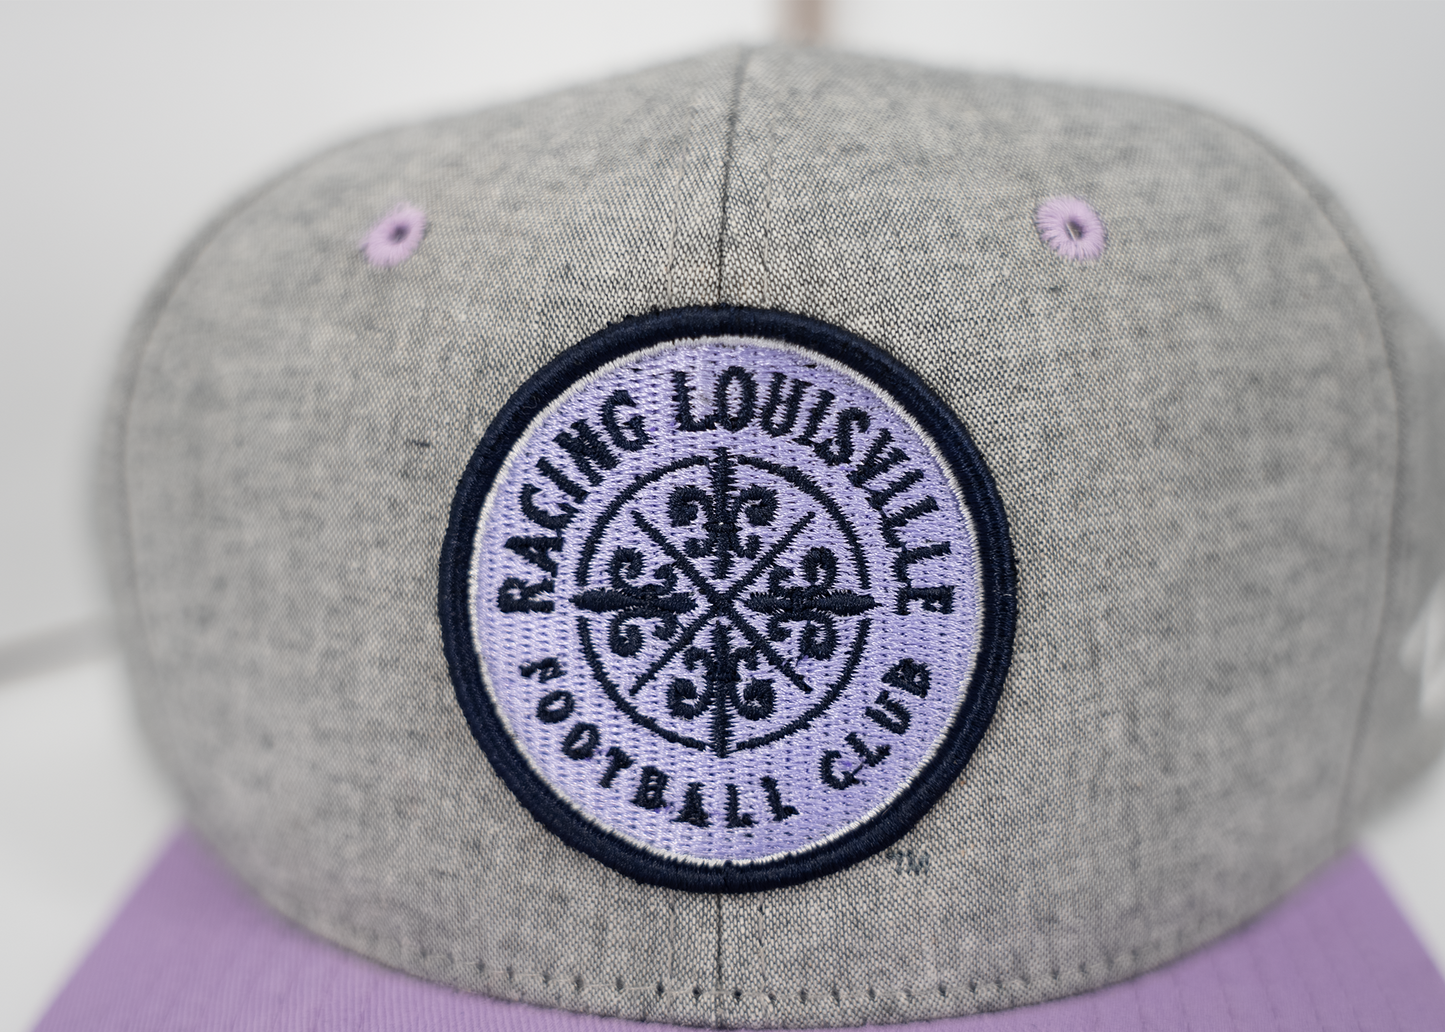 Racing Youth Crest Flatbill Hat